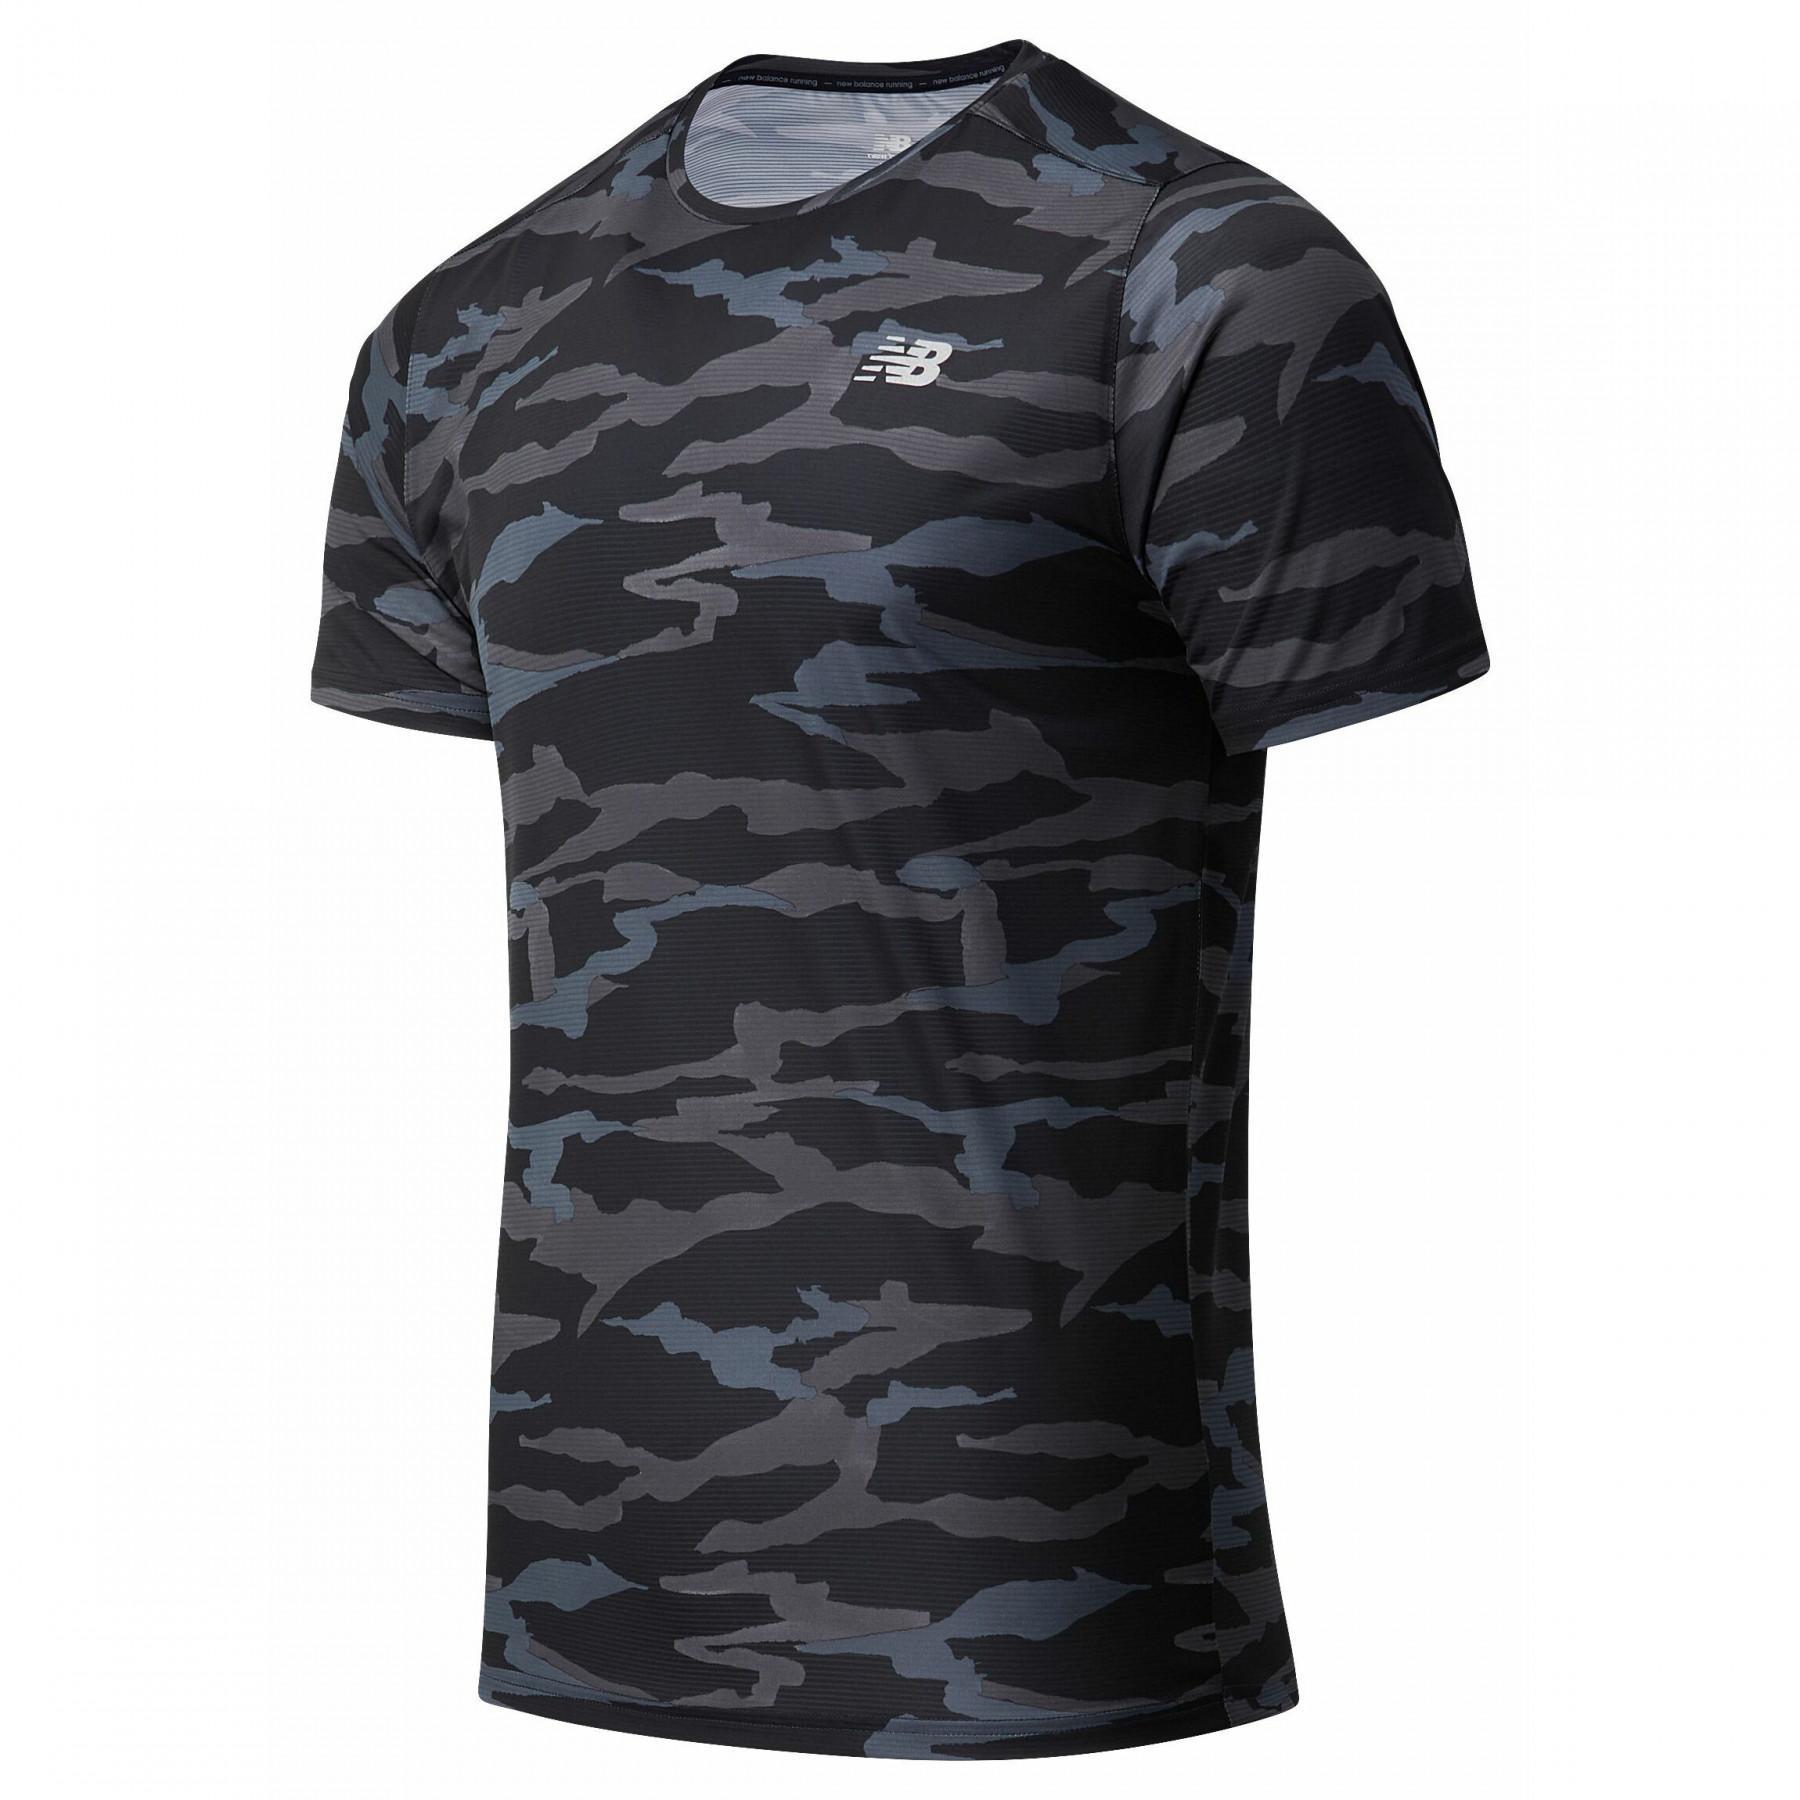 Maillot New Balance printed accelerate